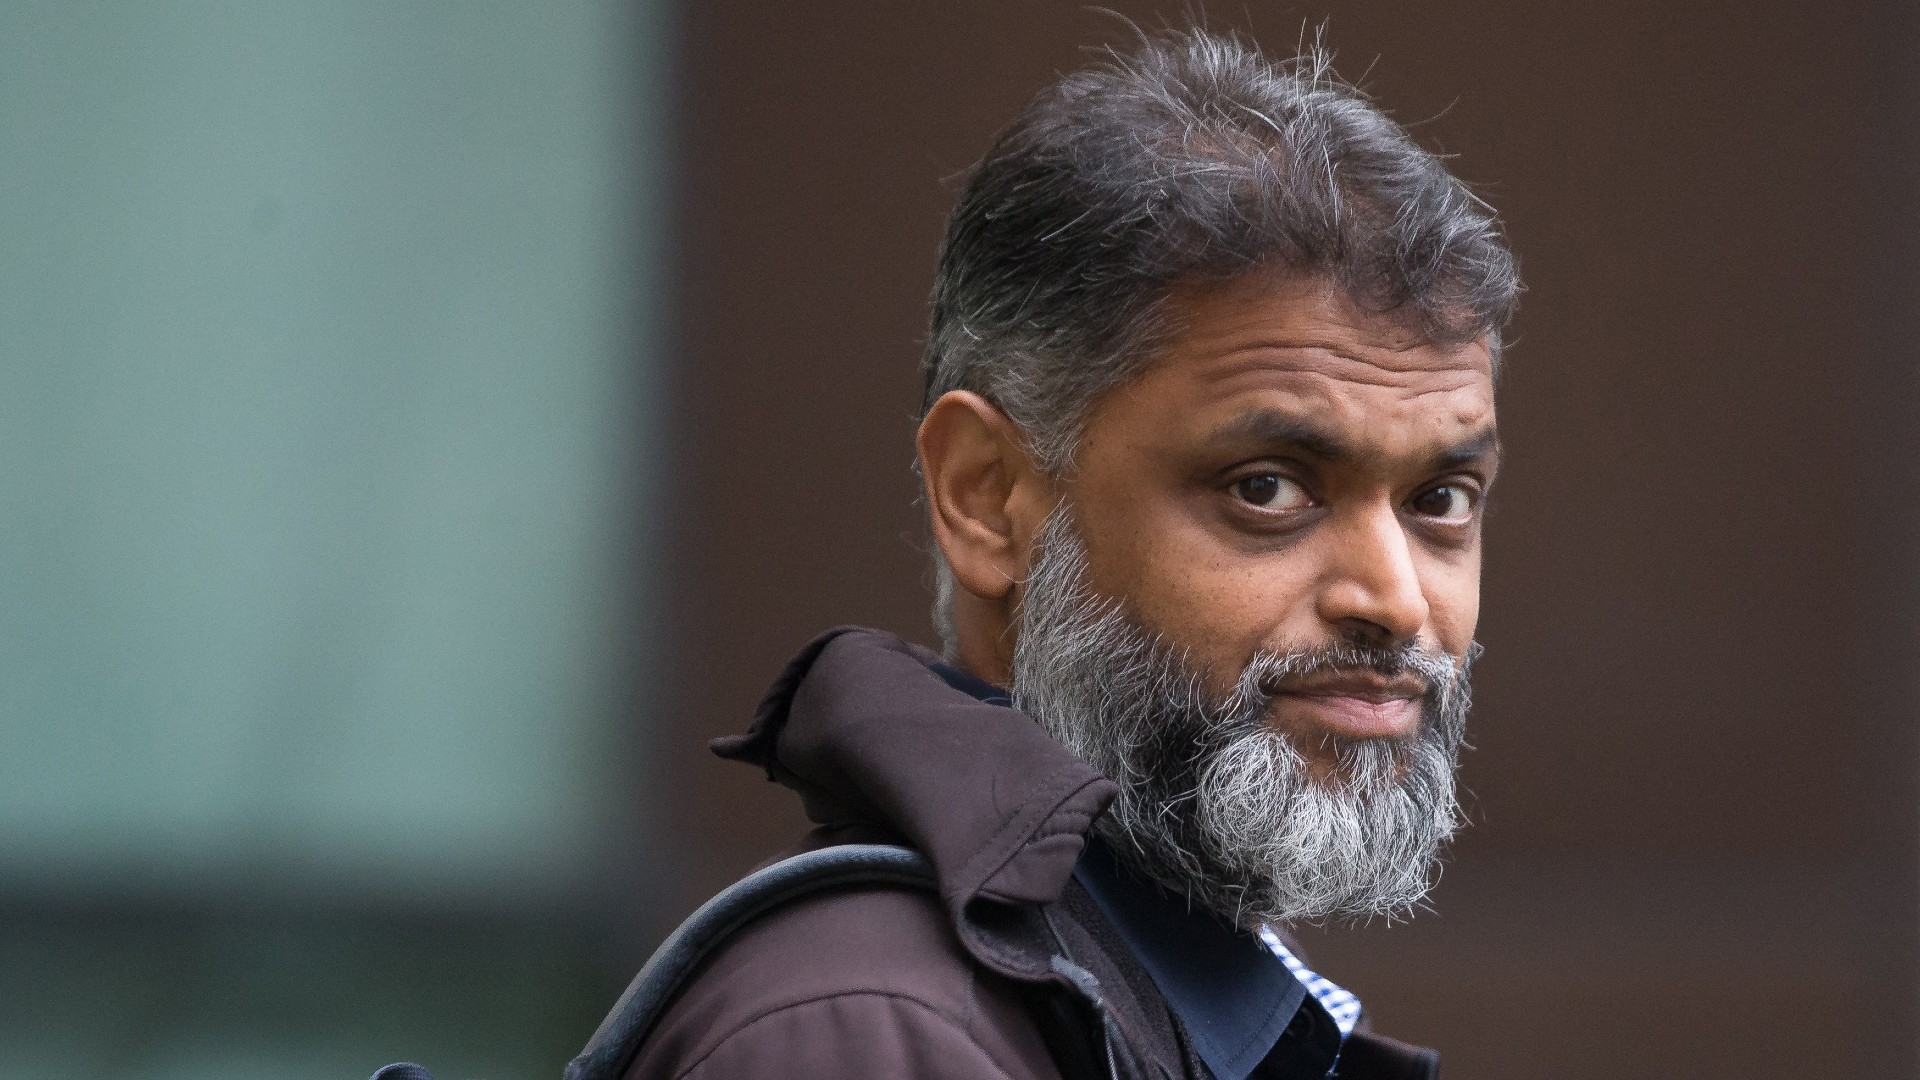 British campaigner Moazzam Begg said that the removal of his passport had denied him the freedom to travel for work and to visit family abroad (AFP/File photo)